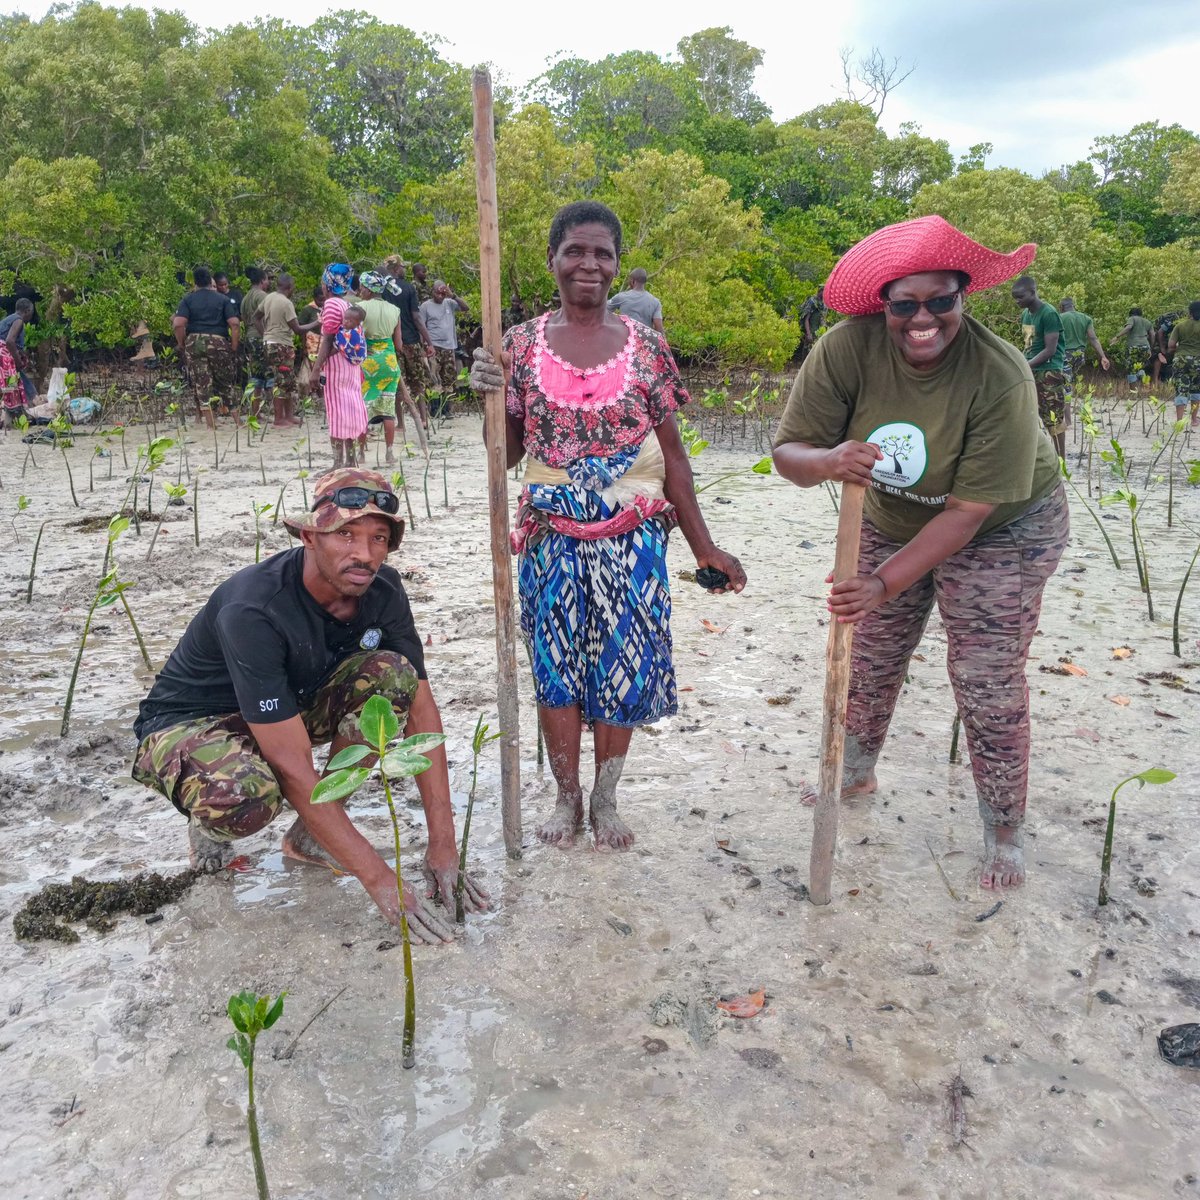 The community is a critical component of our conservation efforts. Today, together with @kdfinfo , @KeEquityBank, and the community, we carried out a mangroves restoration exercise at mida Creek watamu, where 100,000 mangroves were planted.#greeupkenya